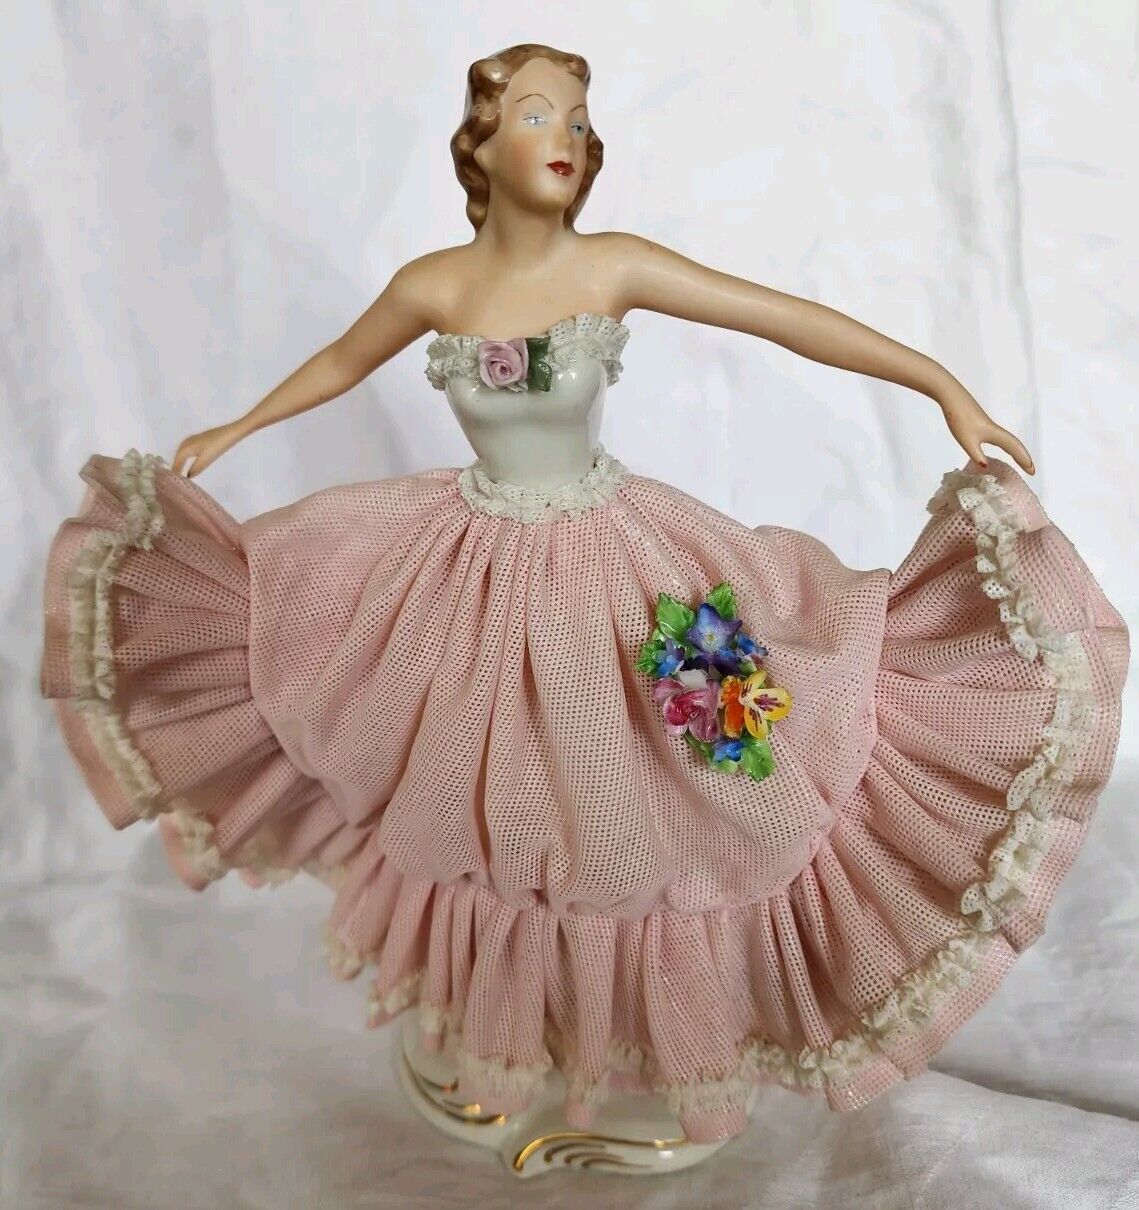 RARE Antique Capodimonte Lace Lady Dancing Holding Gown Figurine OUTSTANDING 